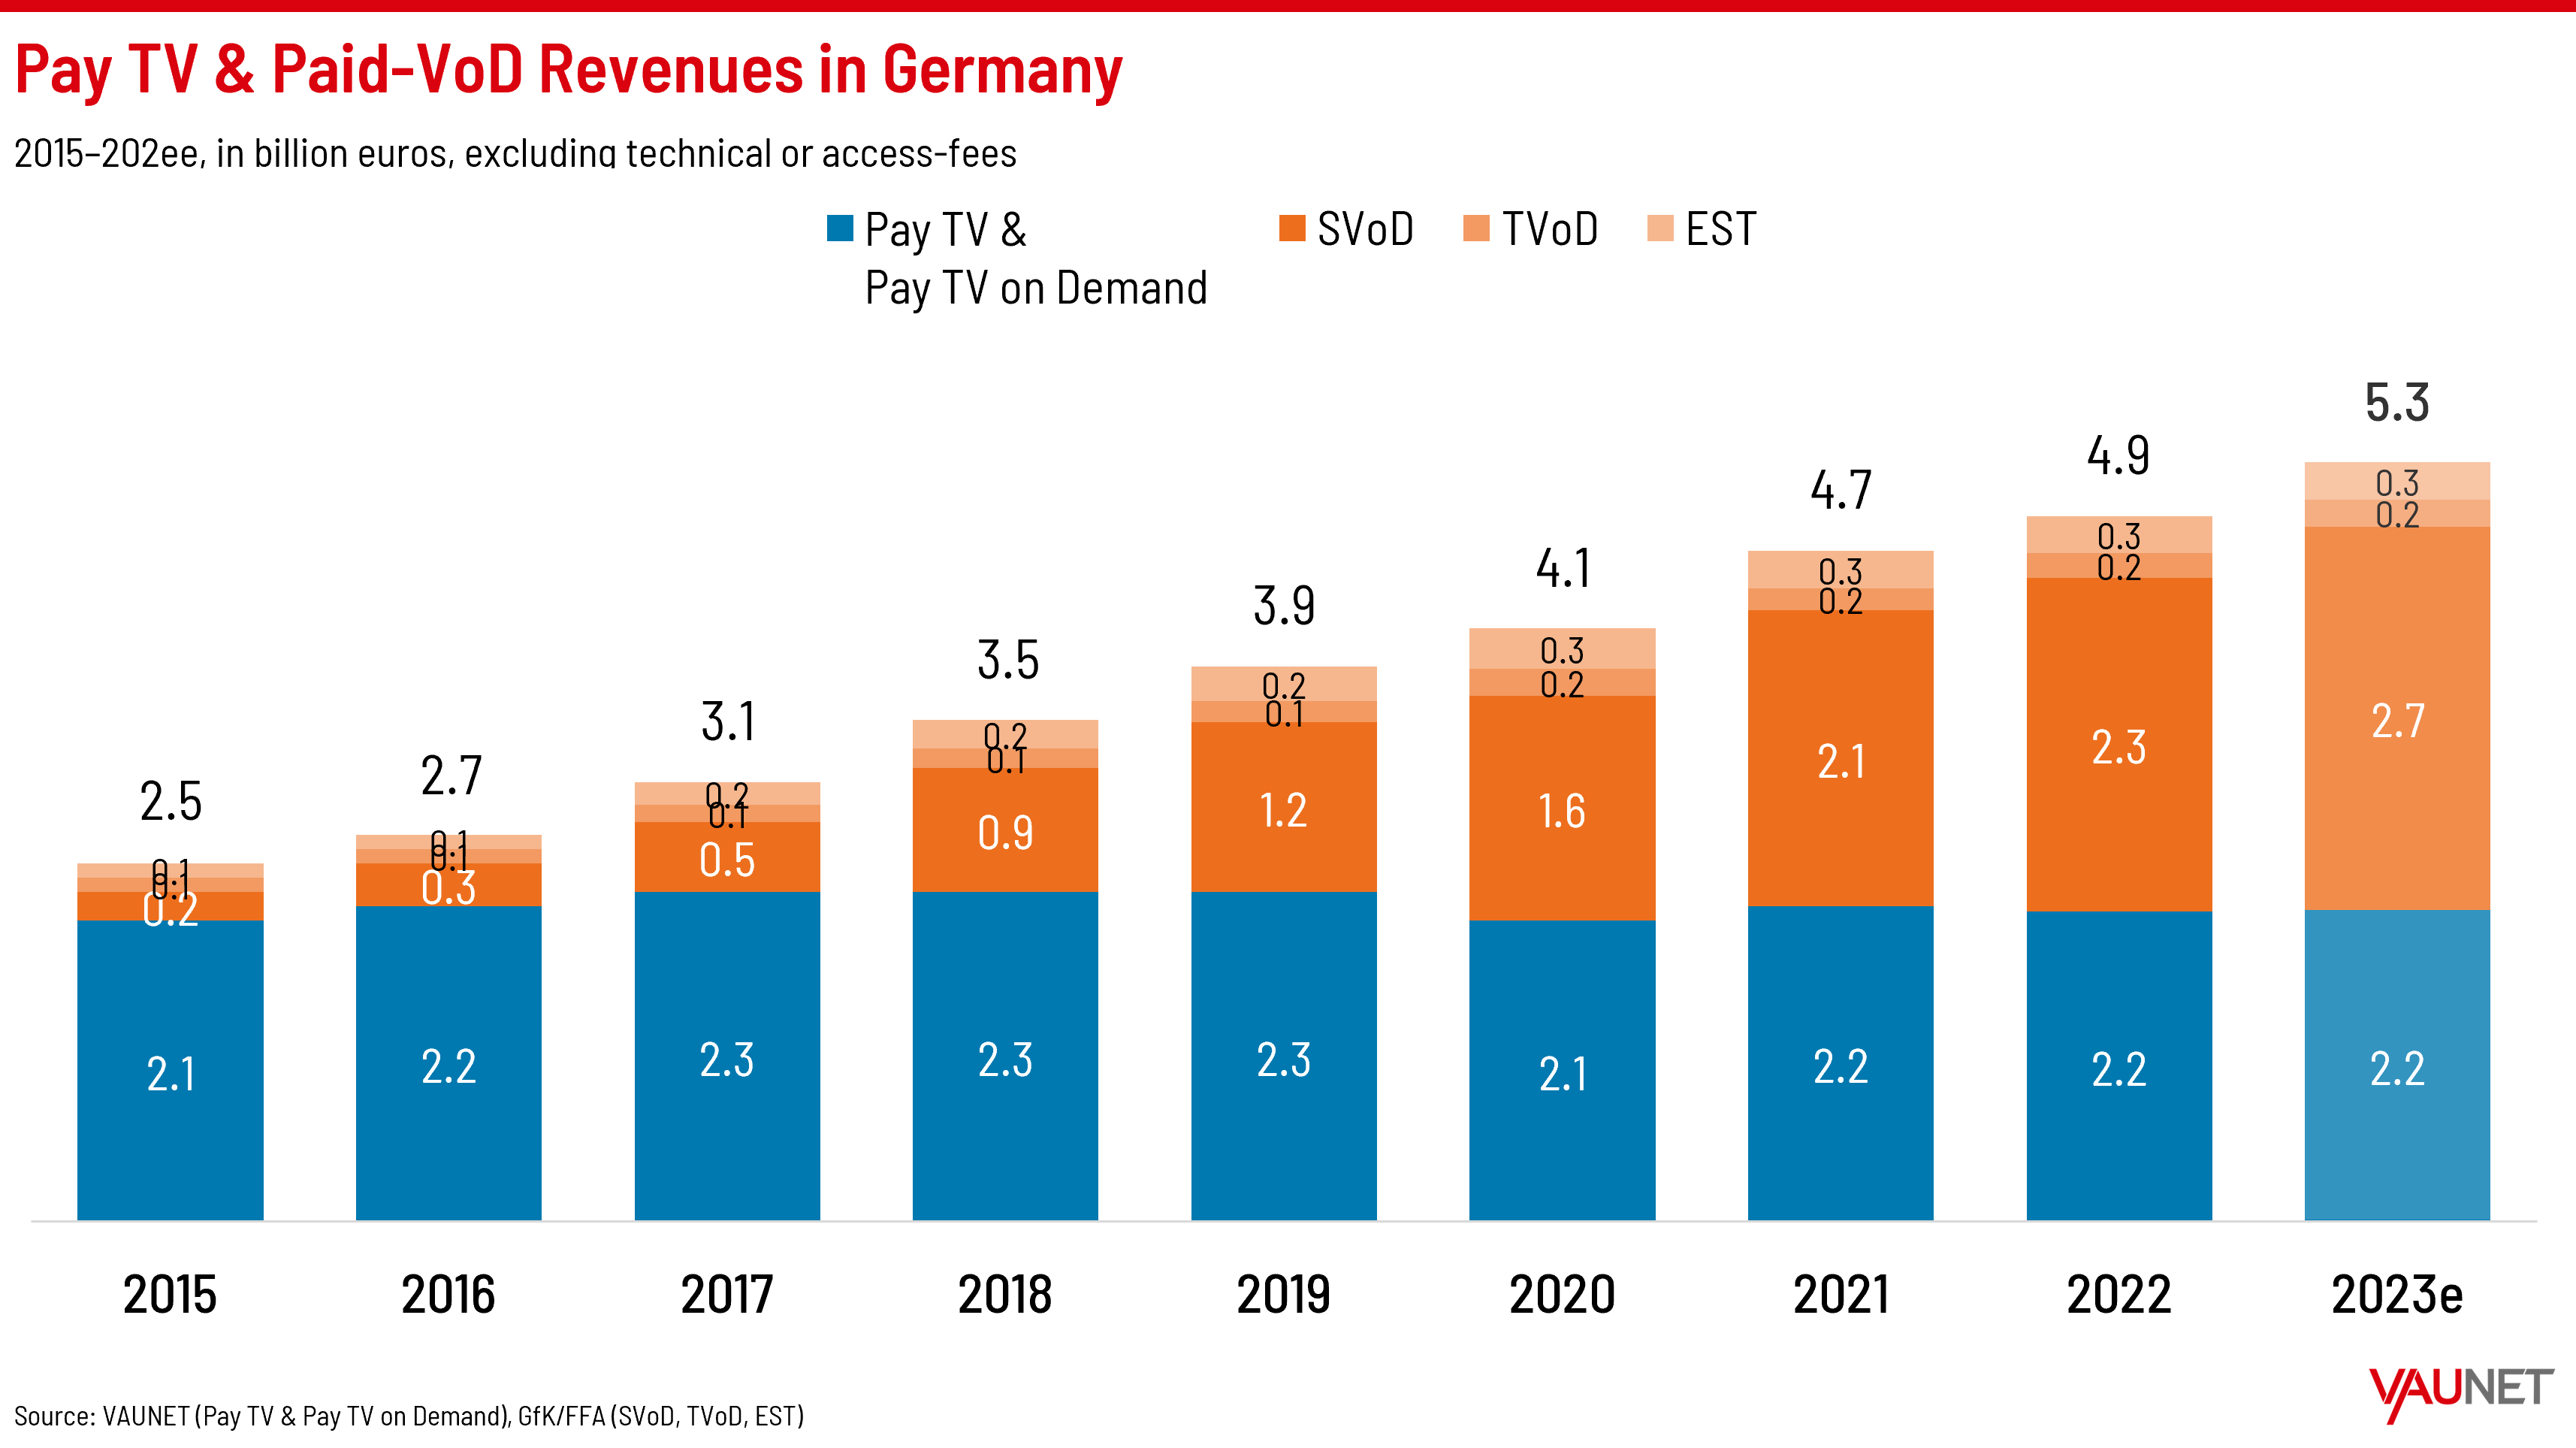 Pay TV and Paid-VOD Revenues in Germany - Pay TV and Pay TV on Demand, SVOD, TVOD, EST - 2015-2023